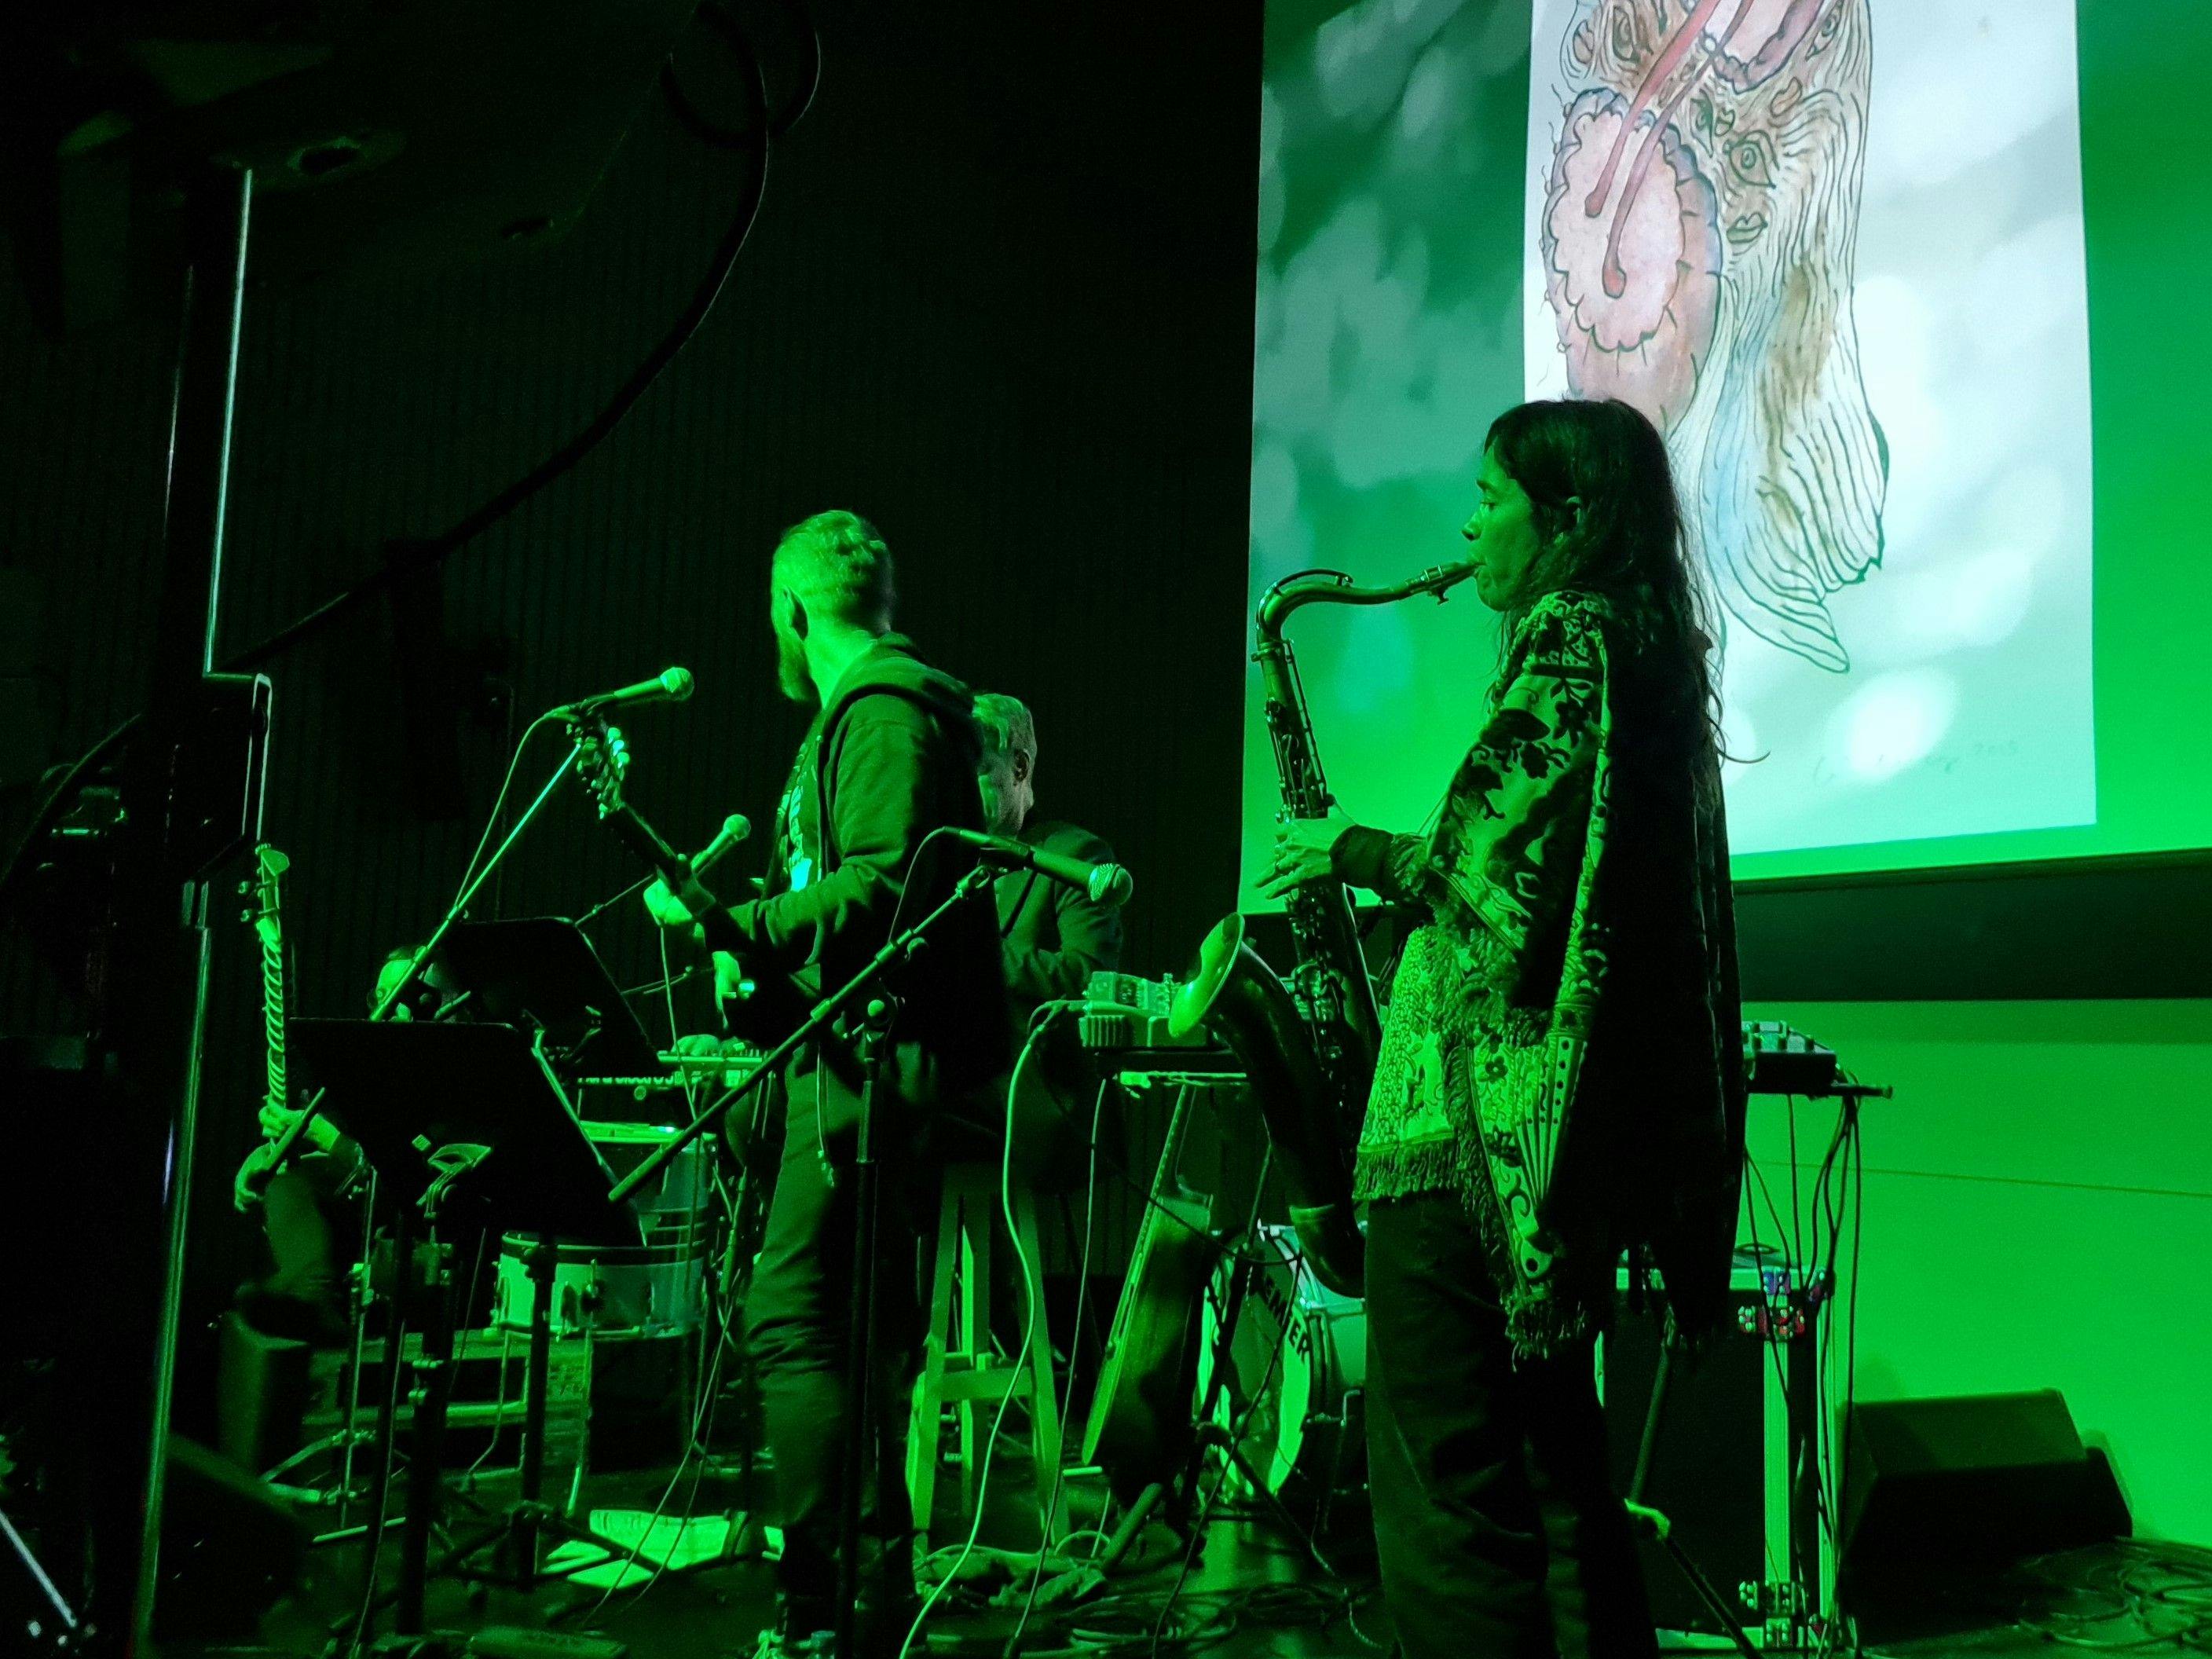 Photo of musicians on stage in green lighting, with saxophonist closest to camera